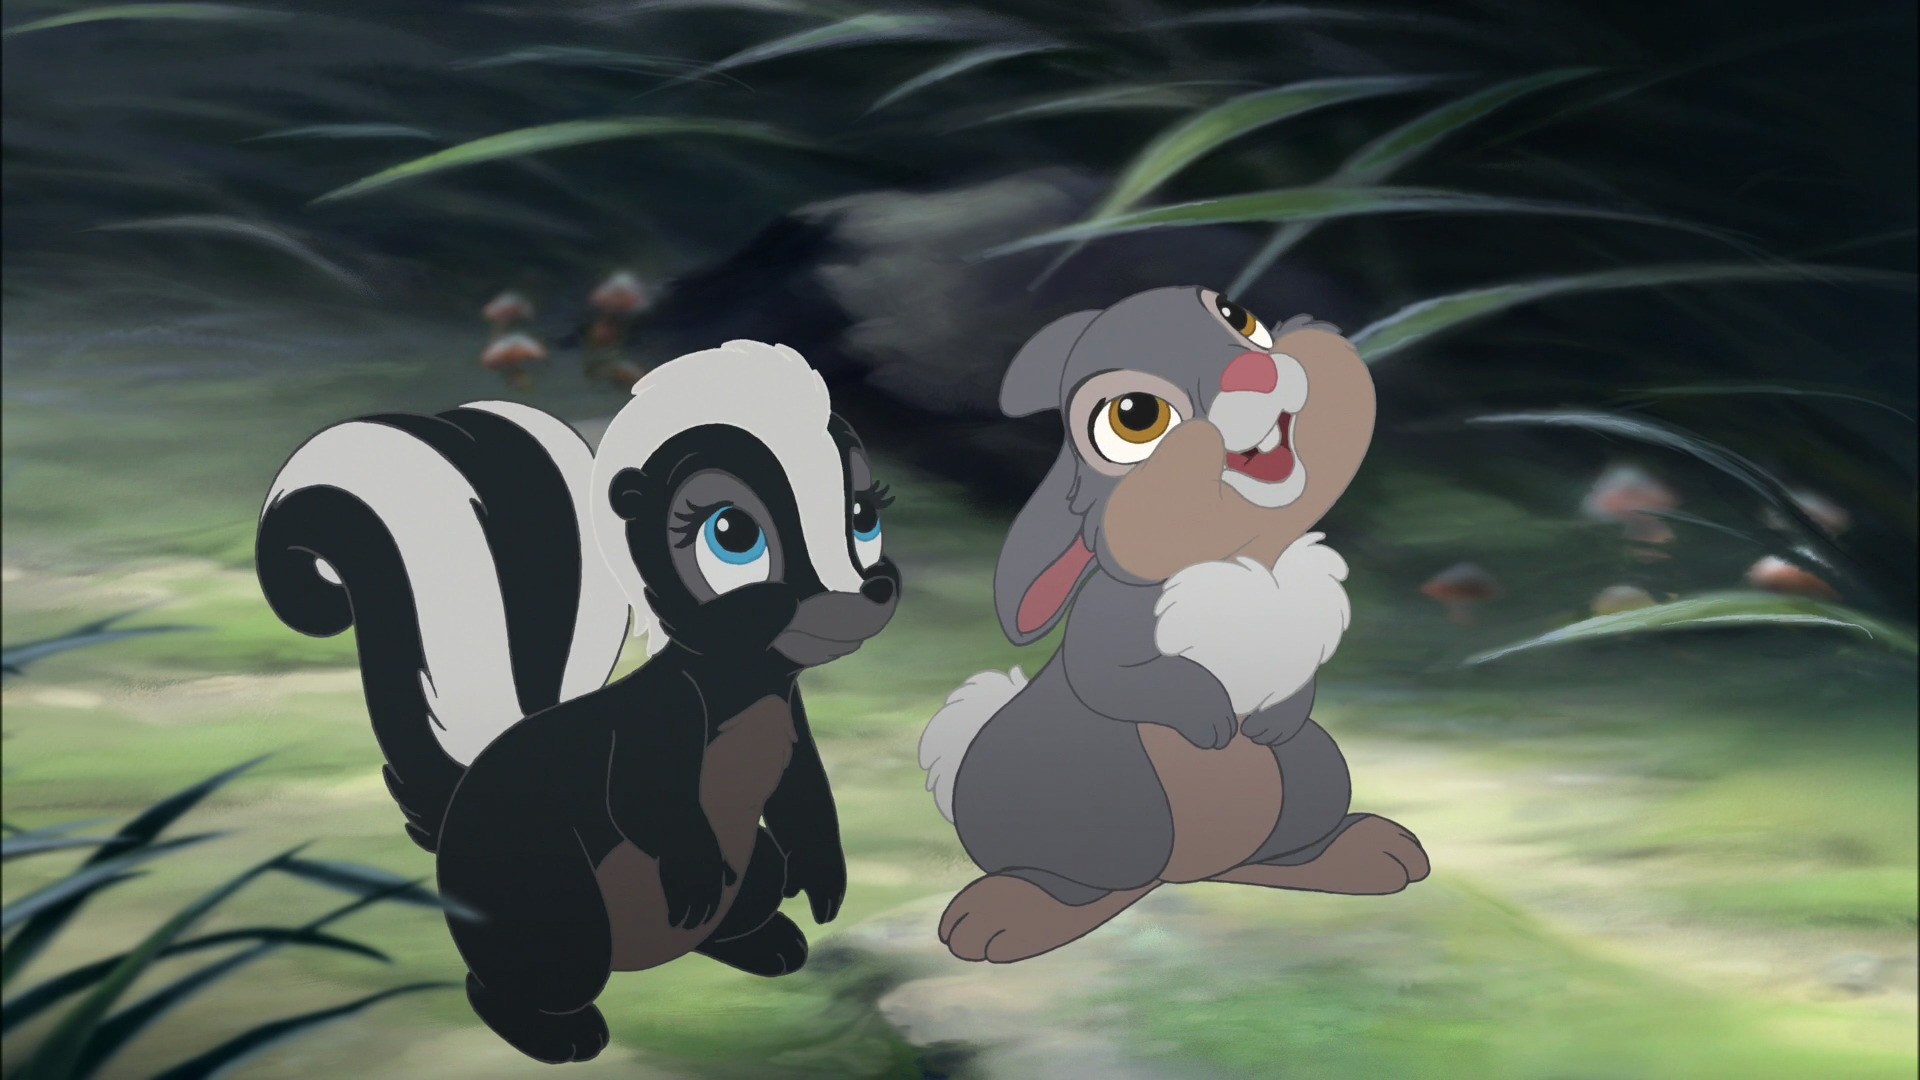 What is Bambi's friend the skunk named?